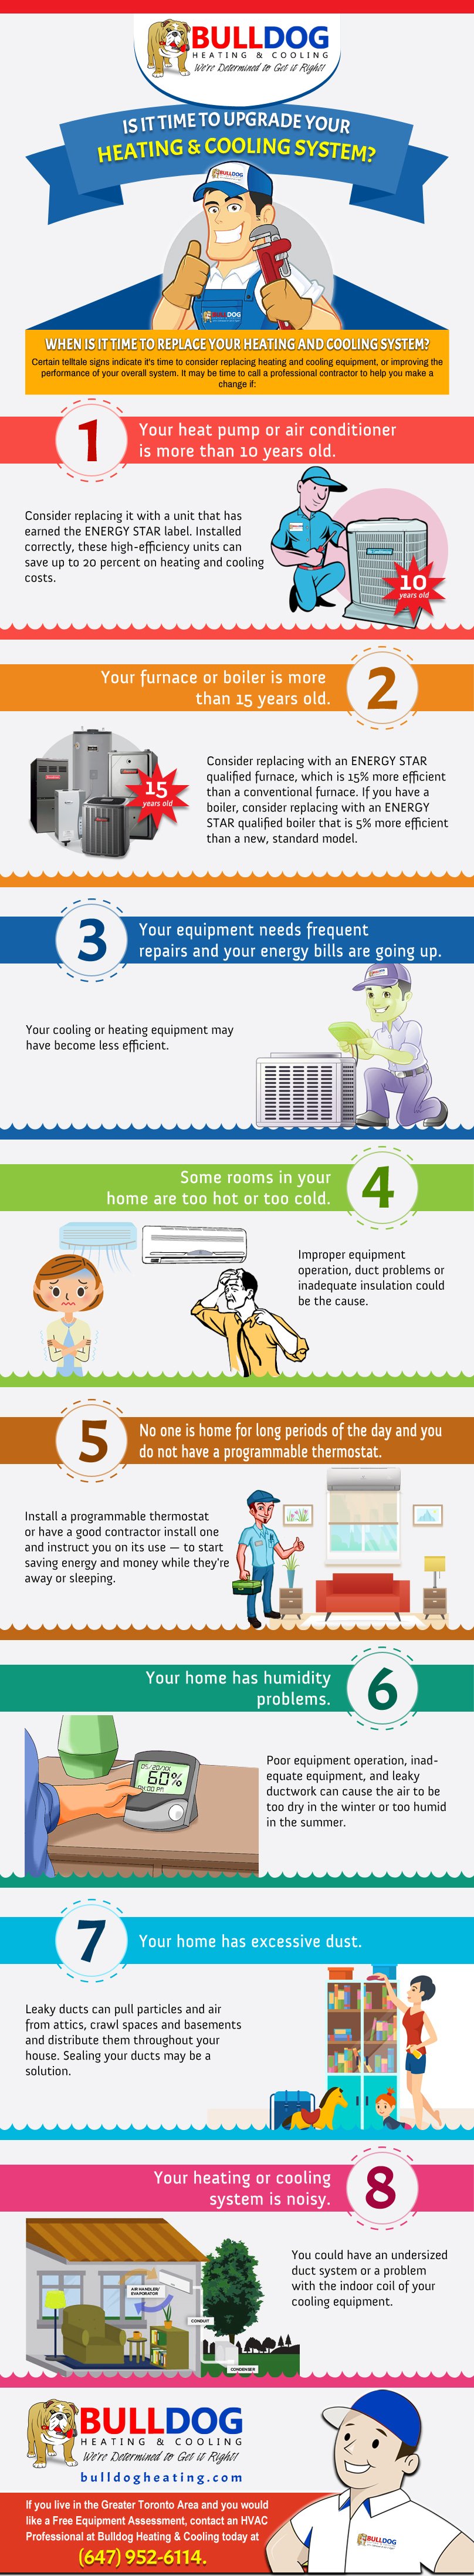 Time to Upgrade Your Heating and Cooling System?